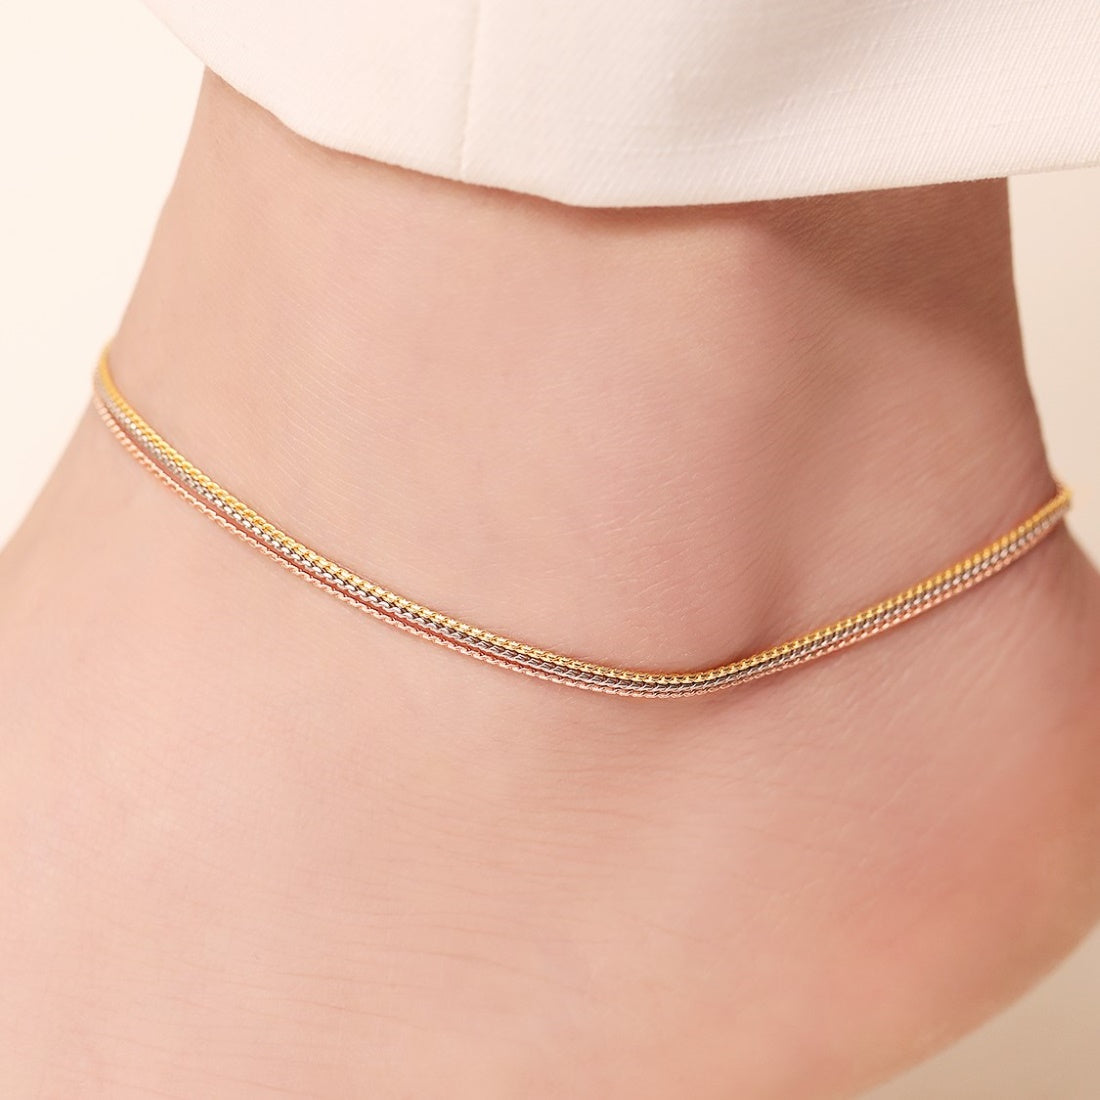 Elegance Tri-Tone Plated 925 Sterling Silver Chain Anklet